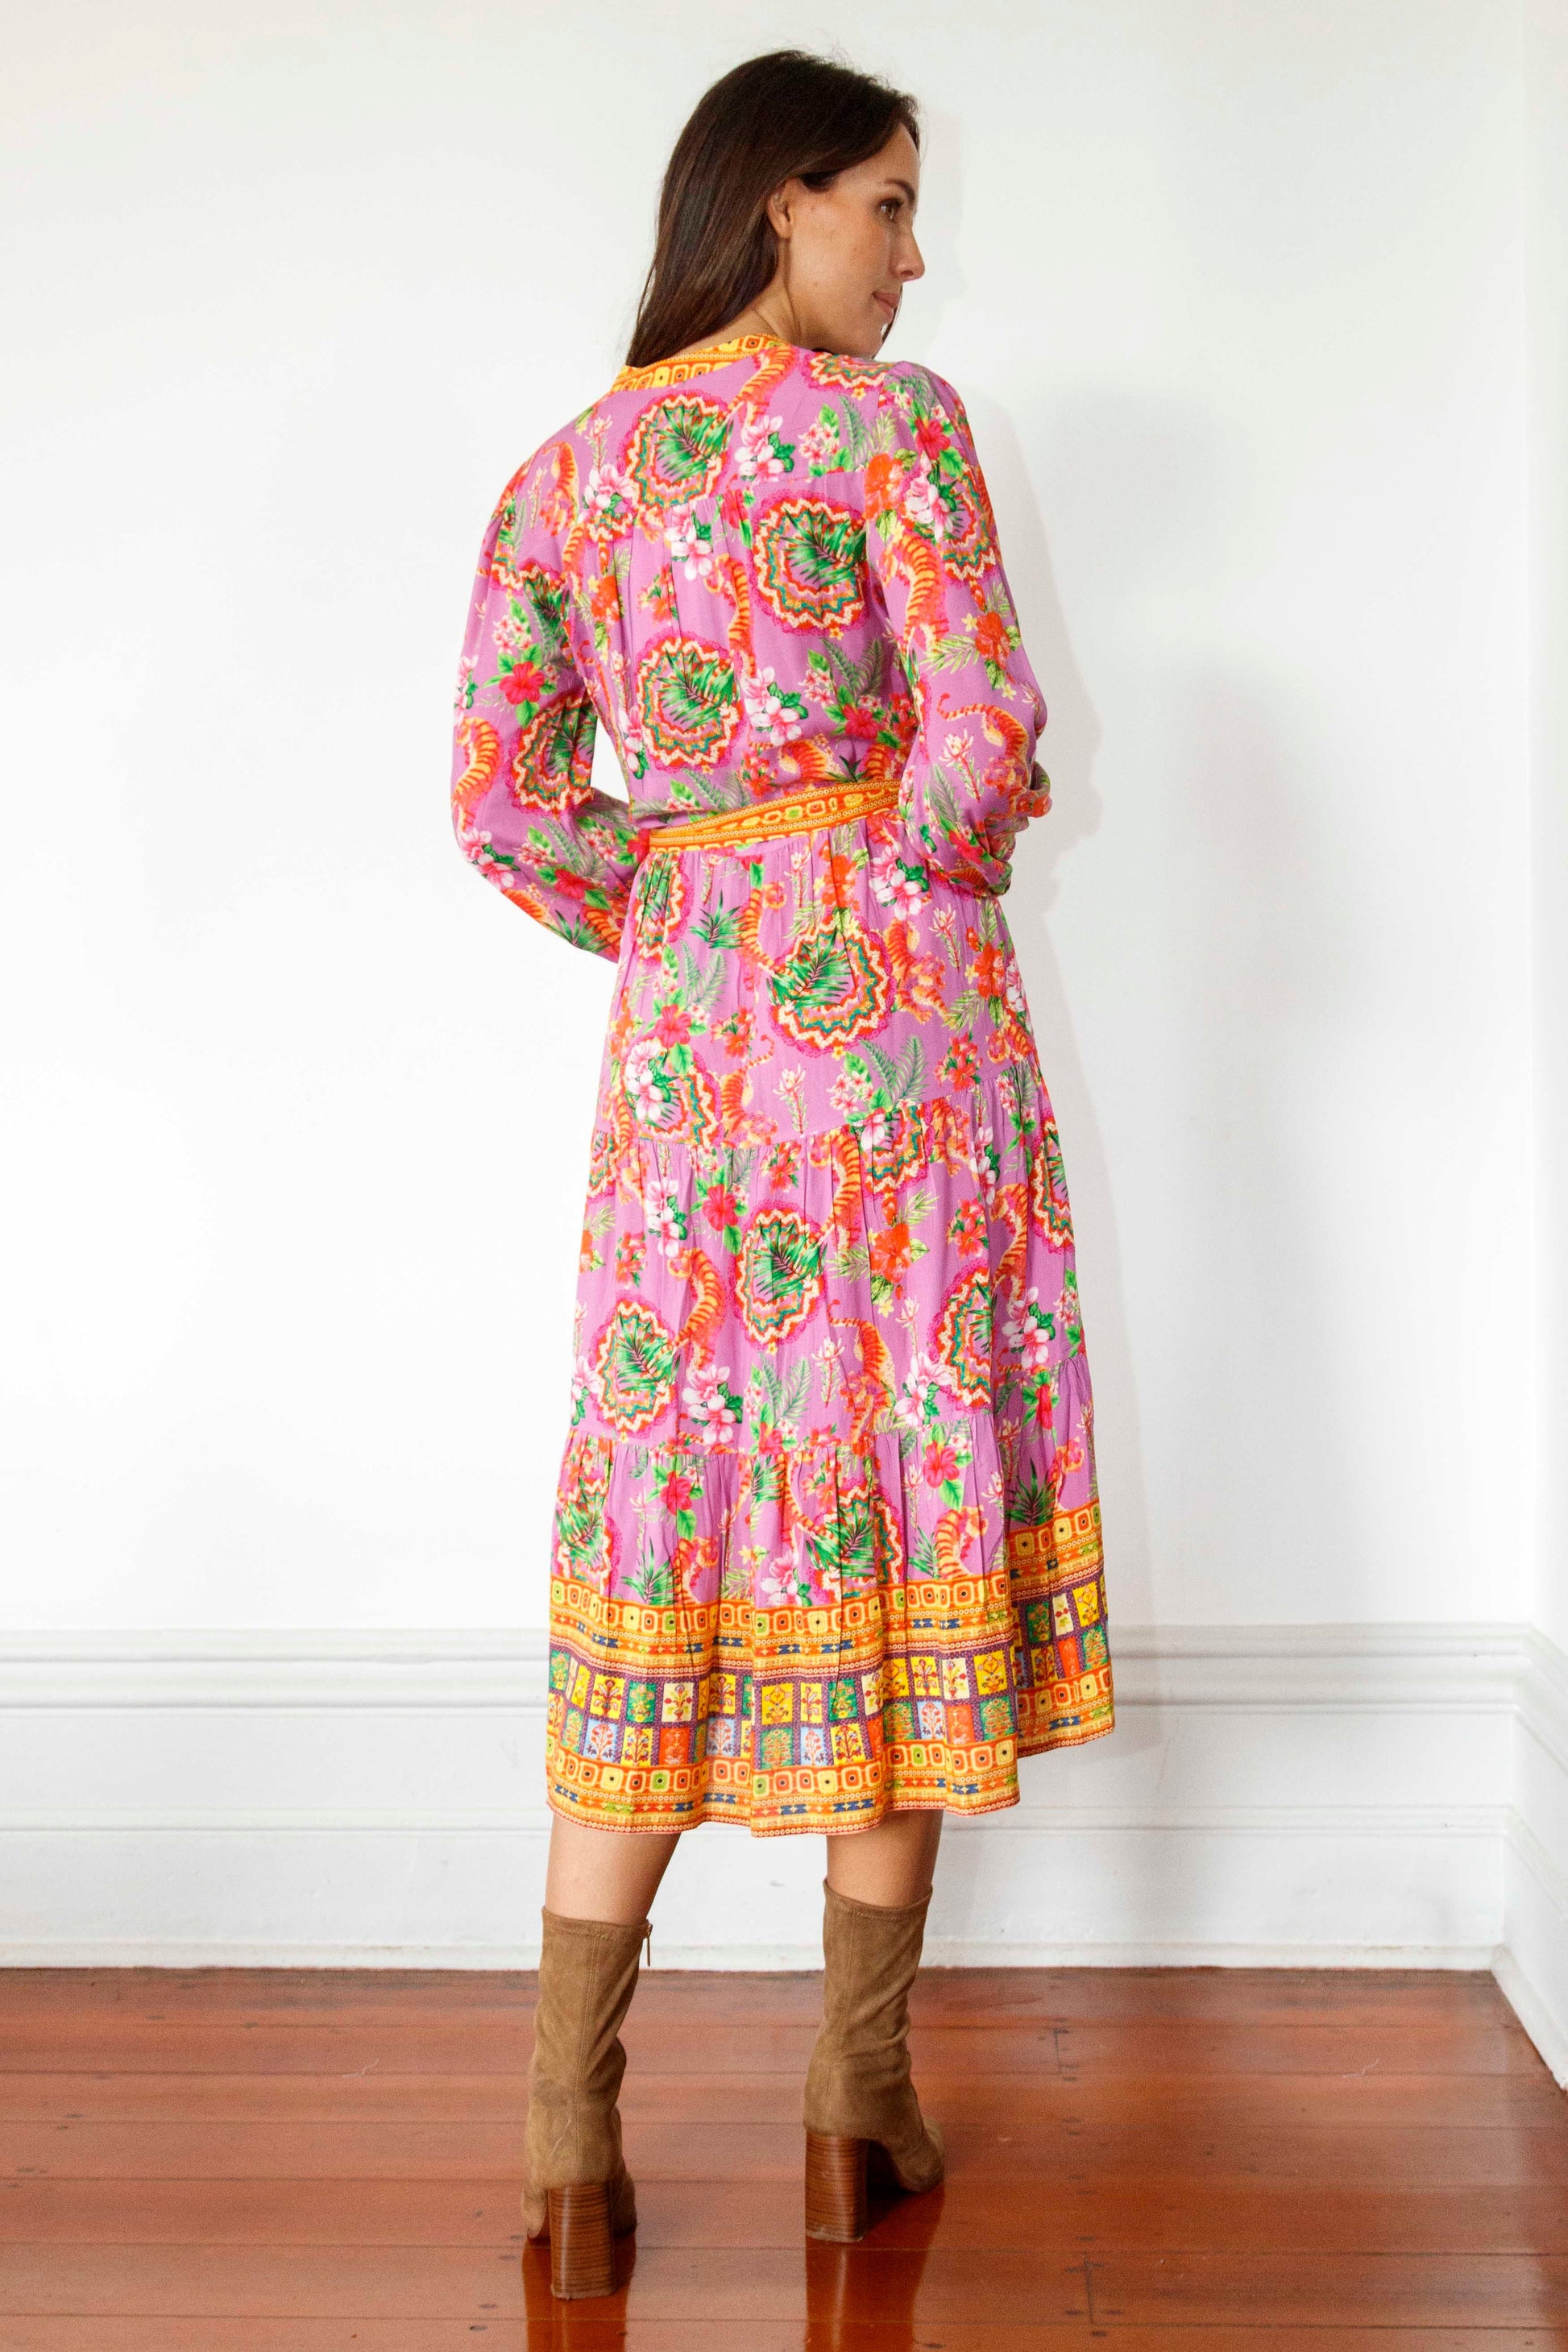 BENGAL TIERED MIDI DRESS - LULA SOUL - BF, clothing, clothing on sale, on sale - Stomp Shoes Darwin